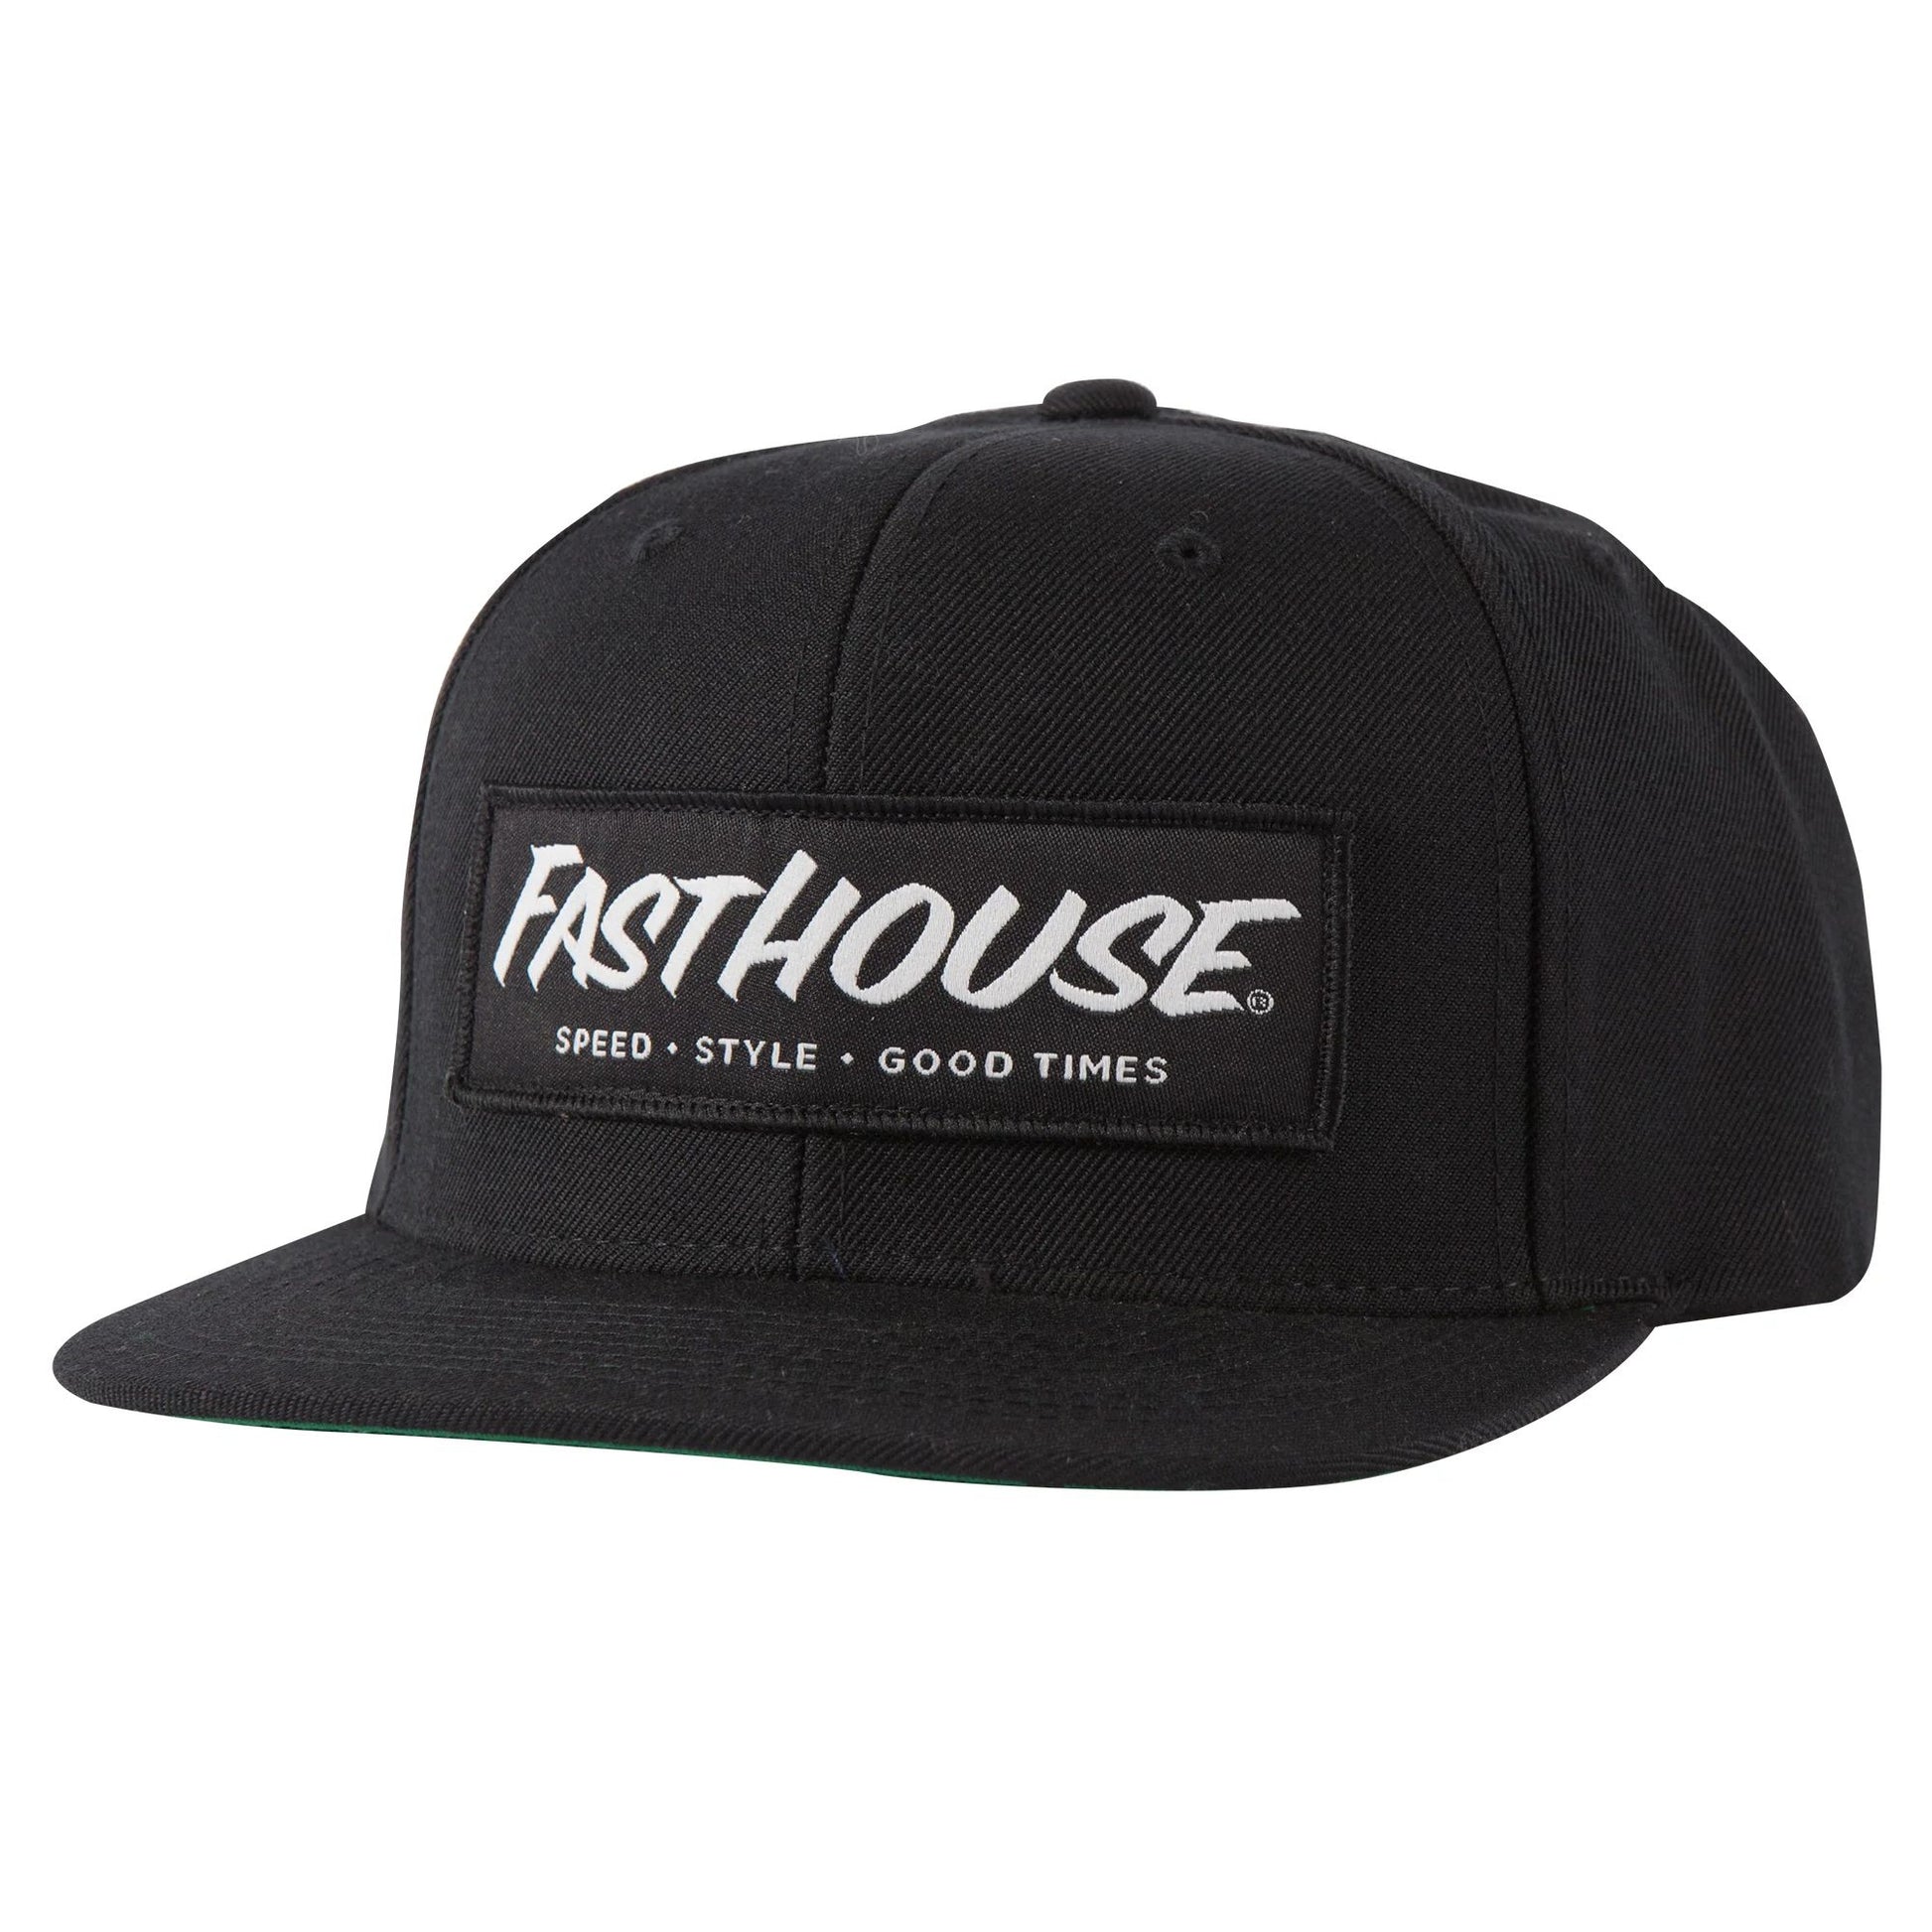 Fasthouse Speed Style Good Times Hat Black OS - Fasthouse Hats